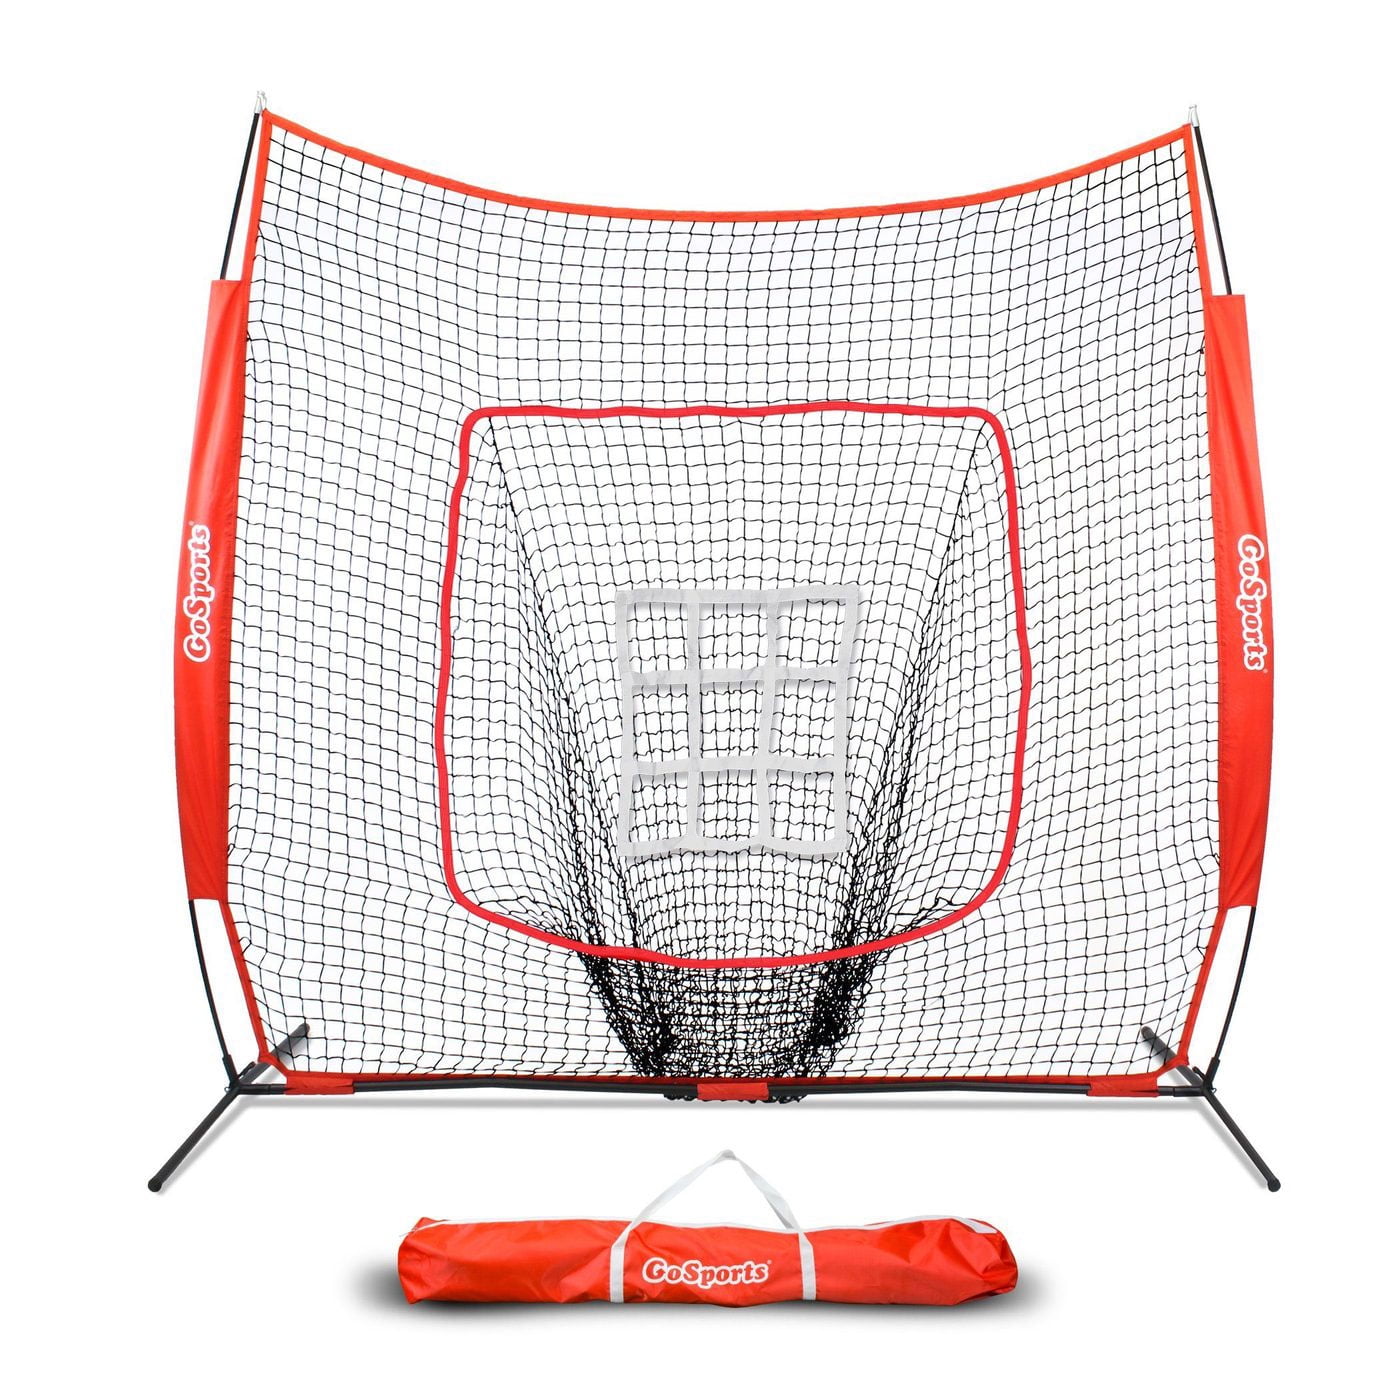 7'x7' Portable Baseball Net Soft Toss Cages Sport Play Indoor Outdoor Elevated 